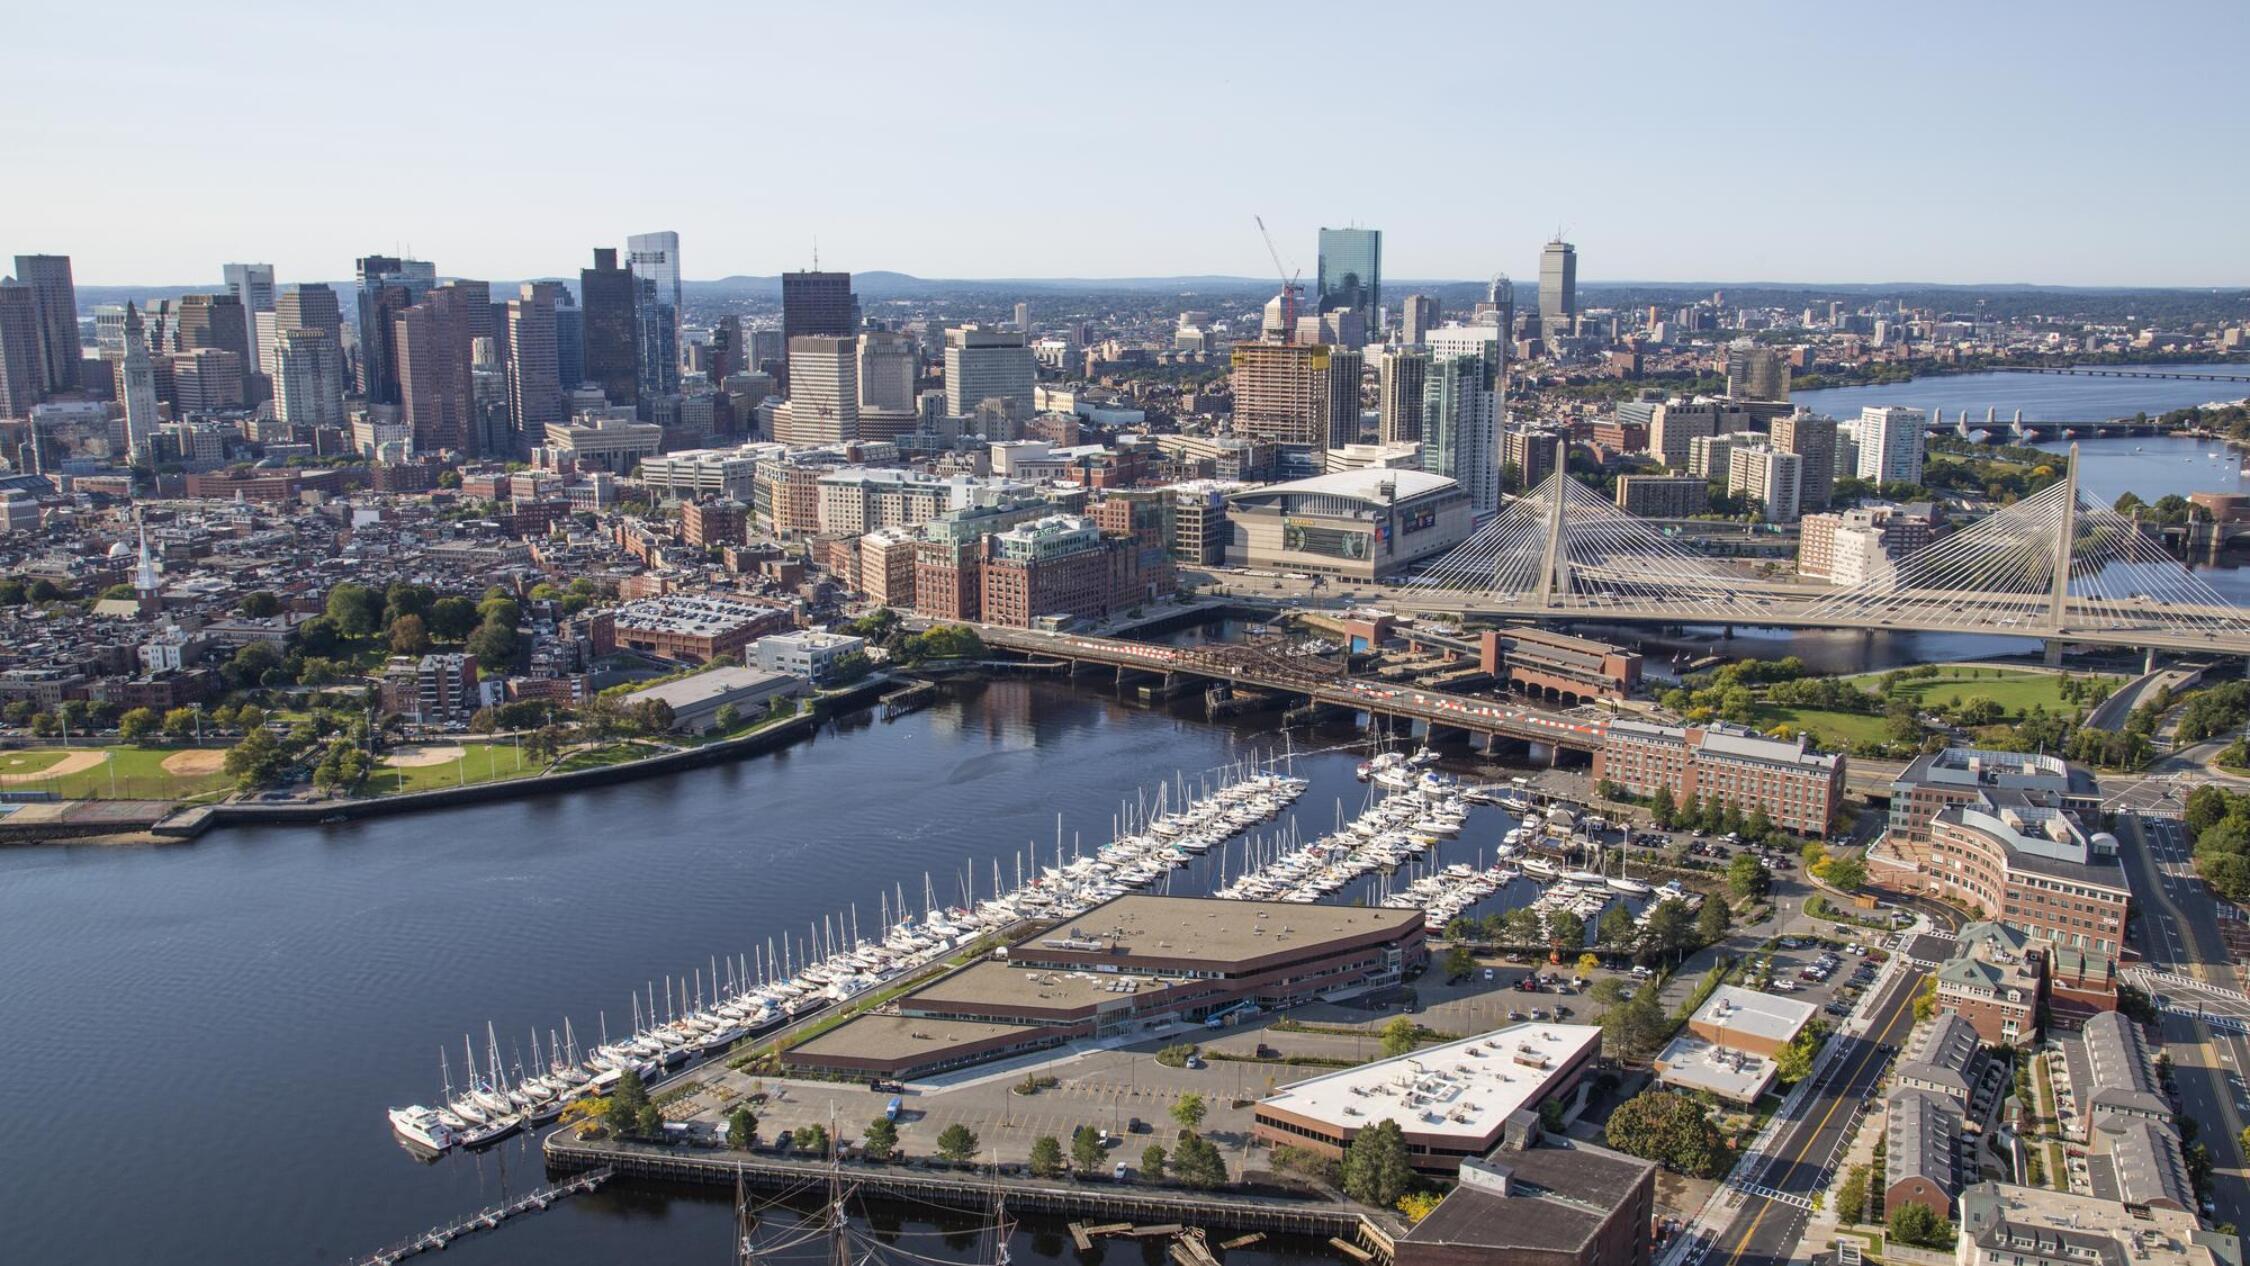 Aerial of Constitution Wharf building, marina, and river, with Boston skyline in background